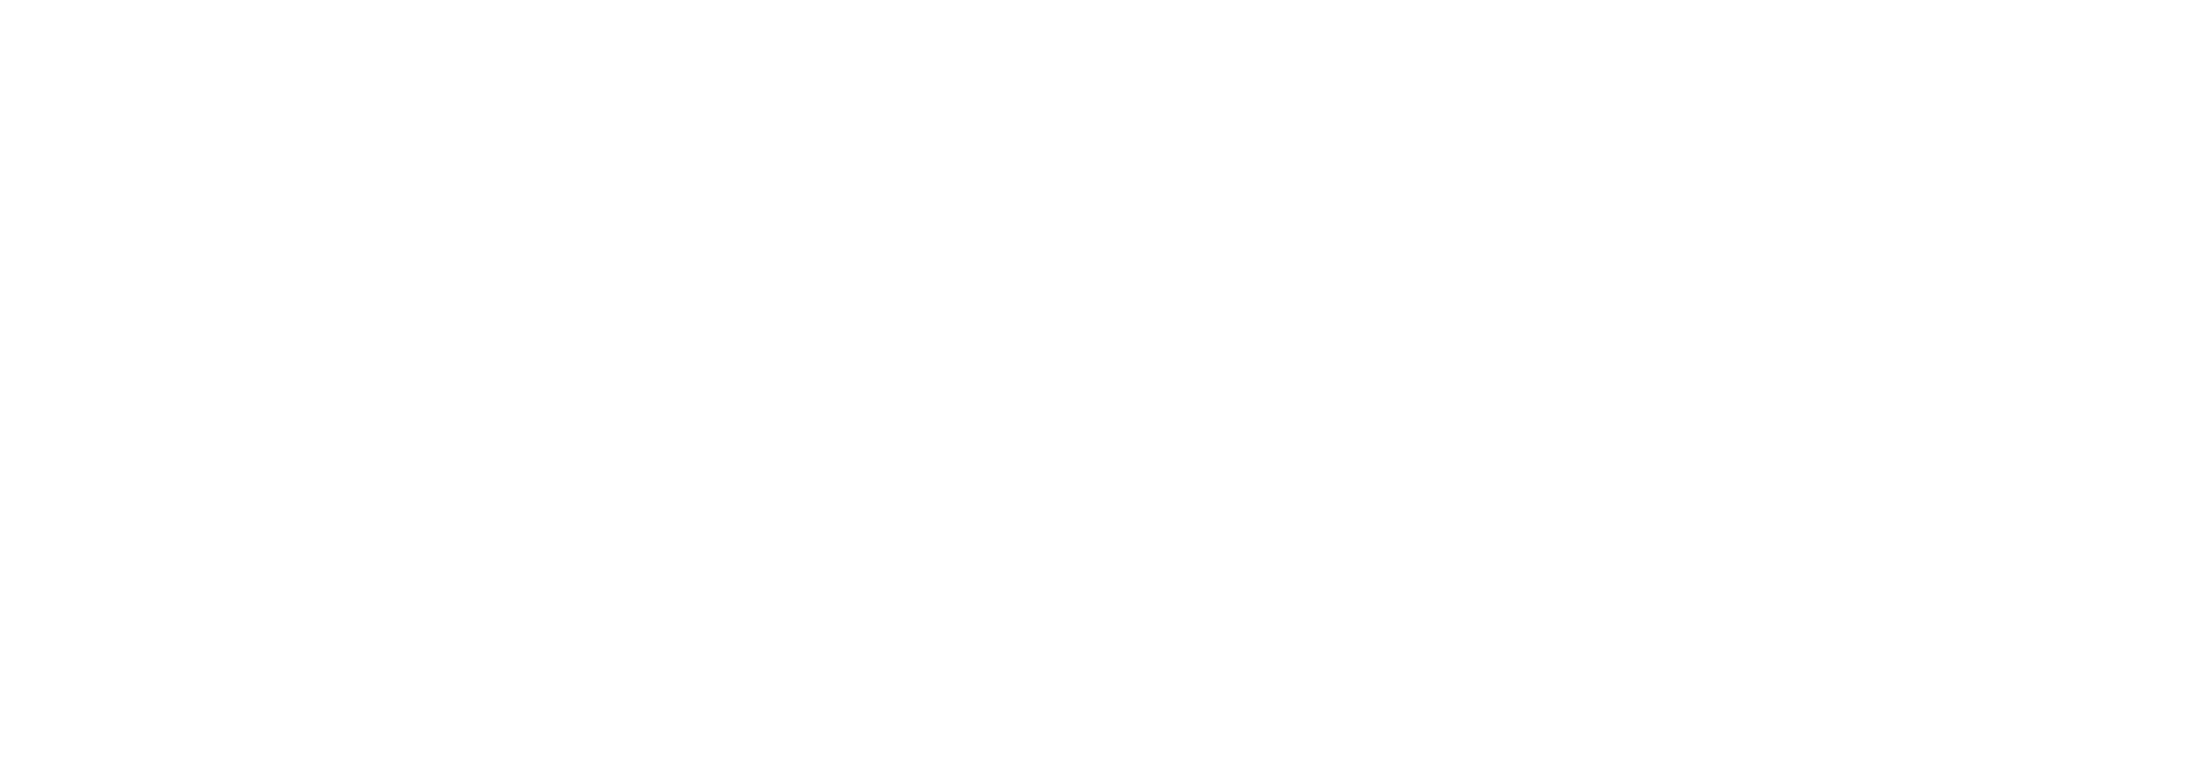 The Swanson Law Group Website Logo